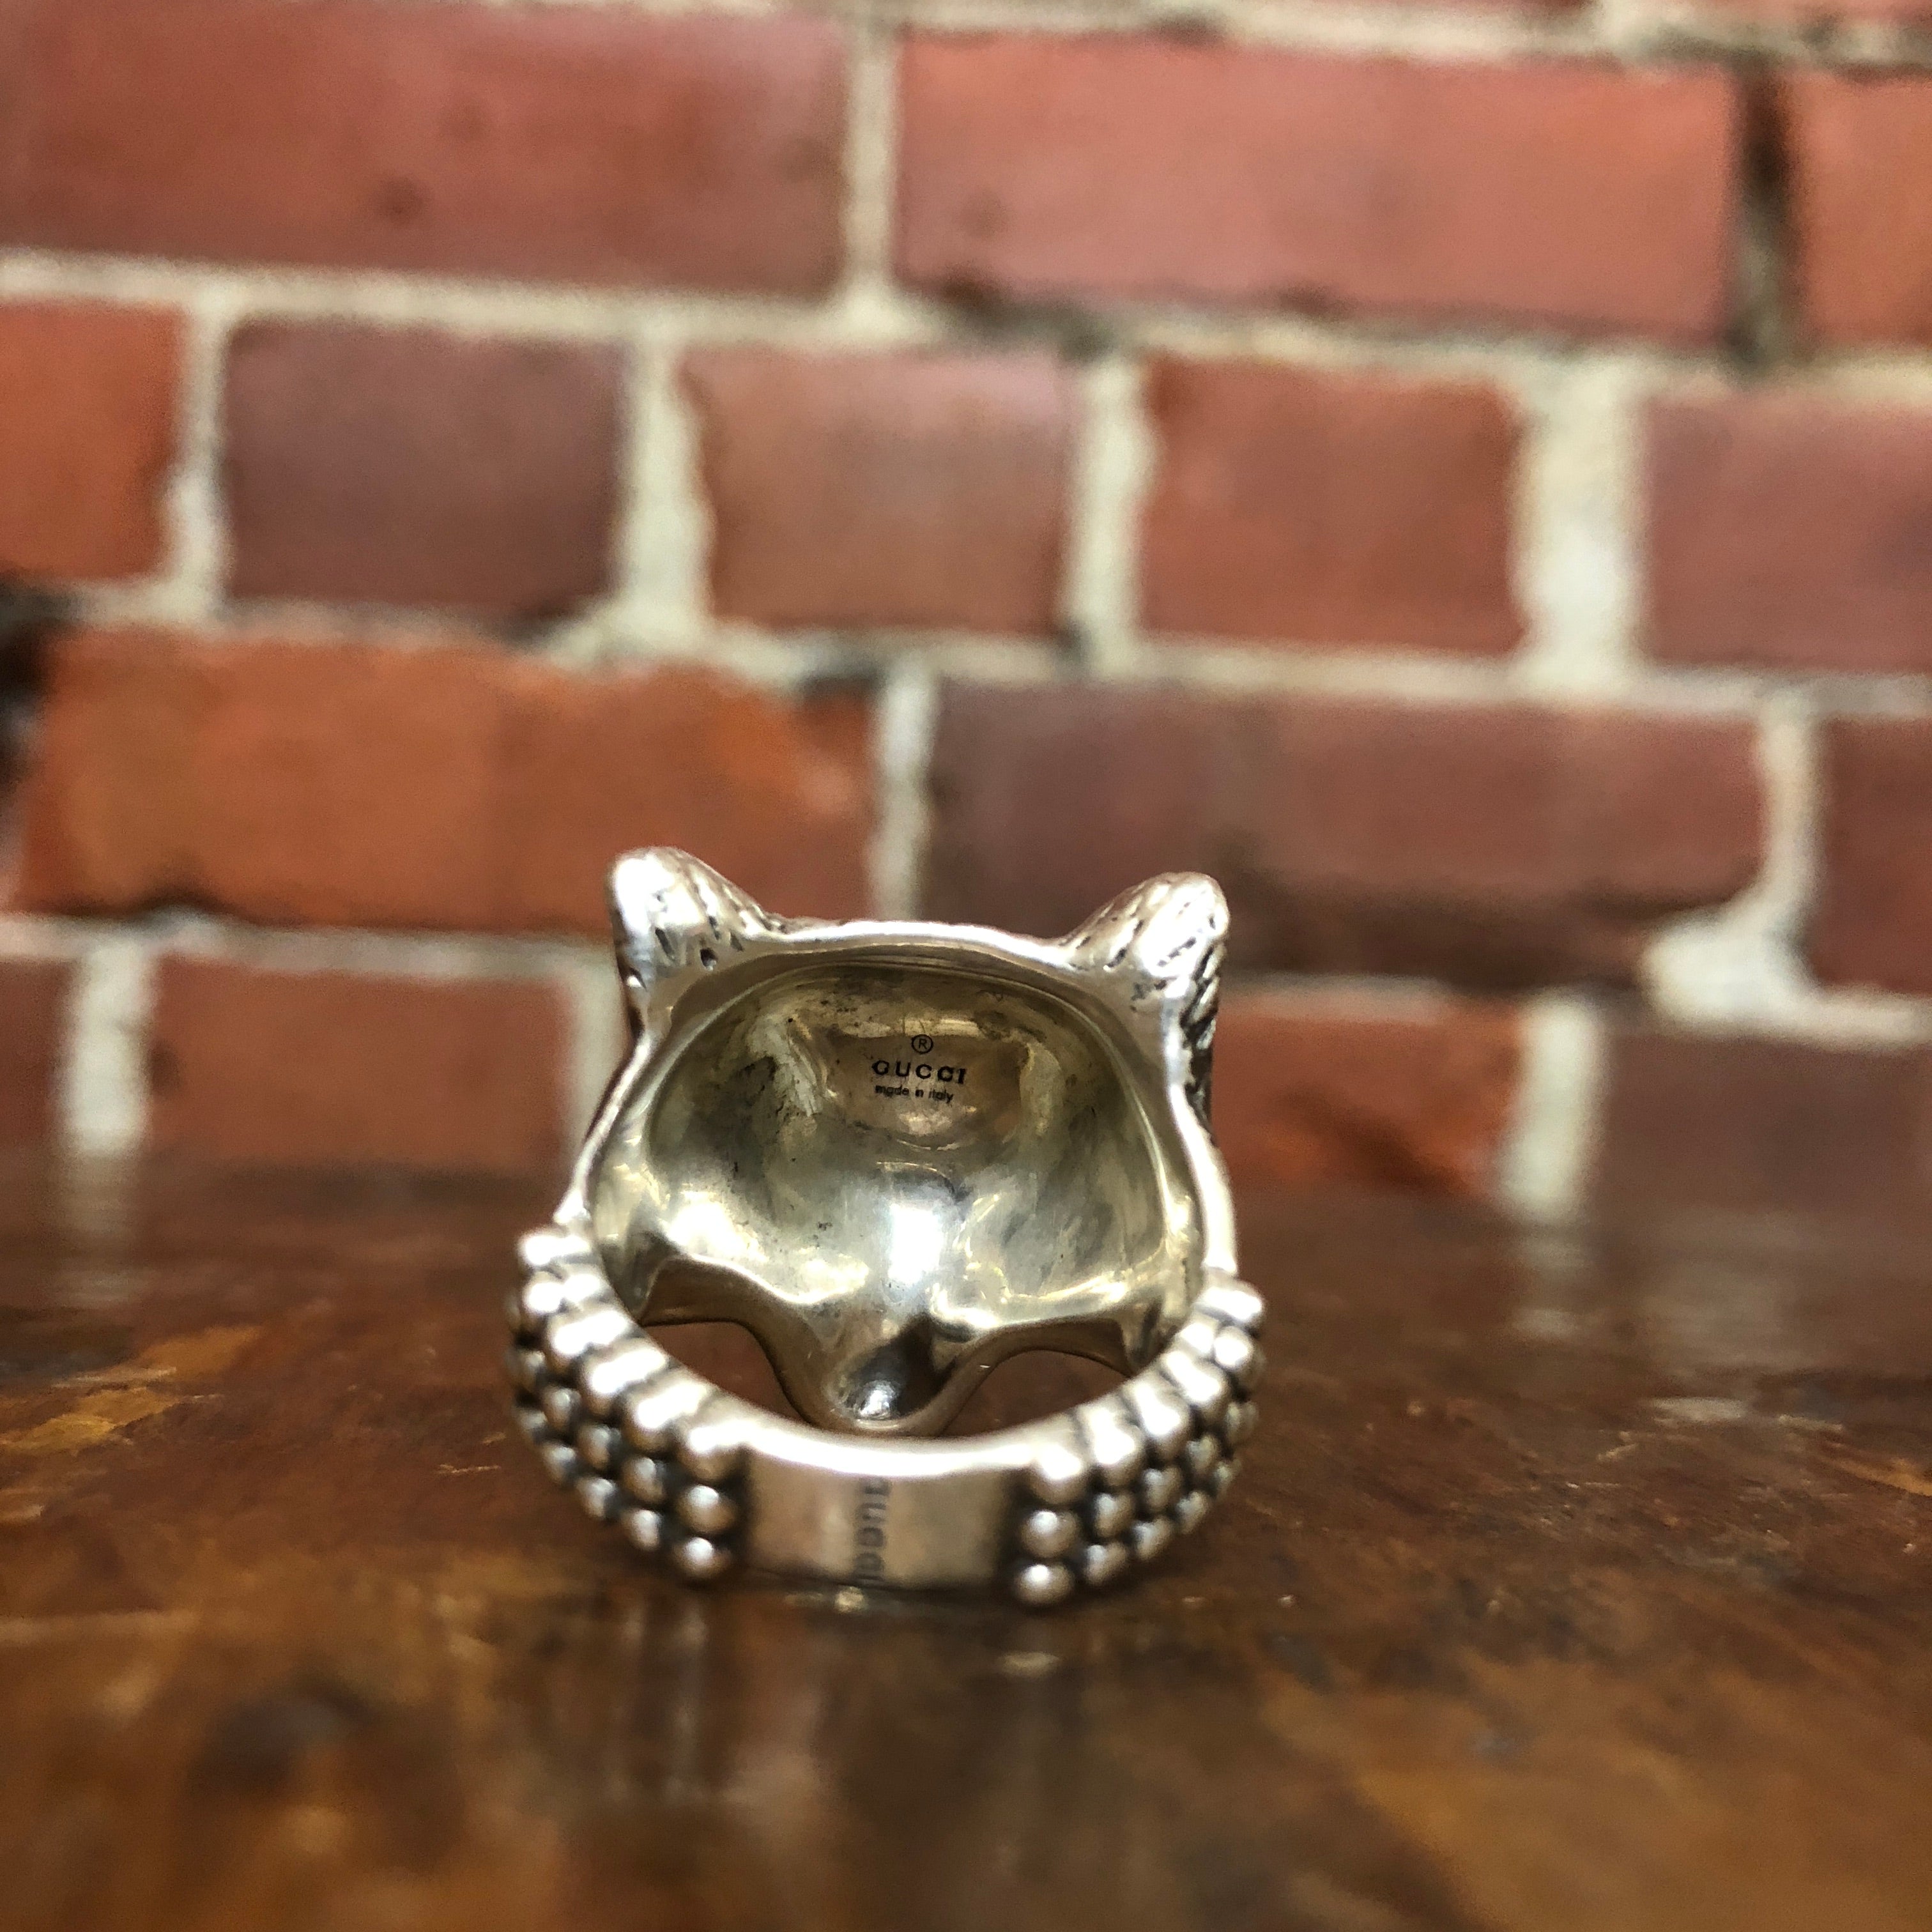 GUCCI Anger Forest wolf head ring in silver